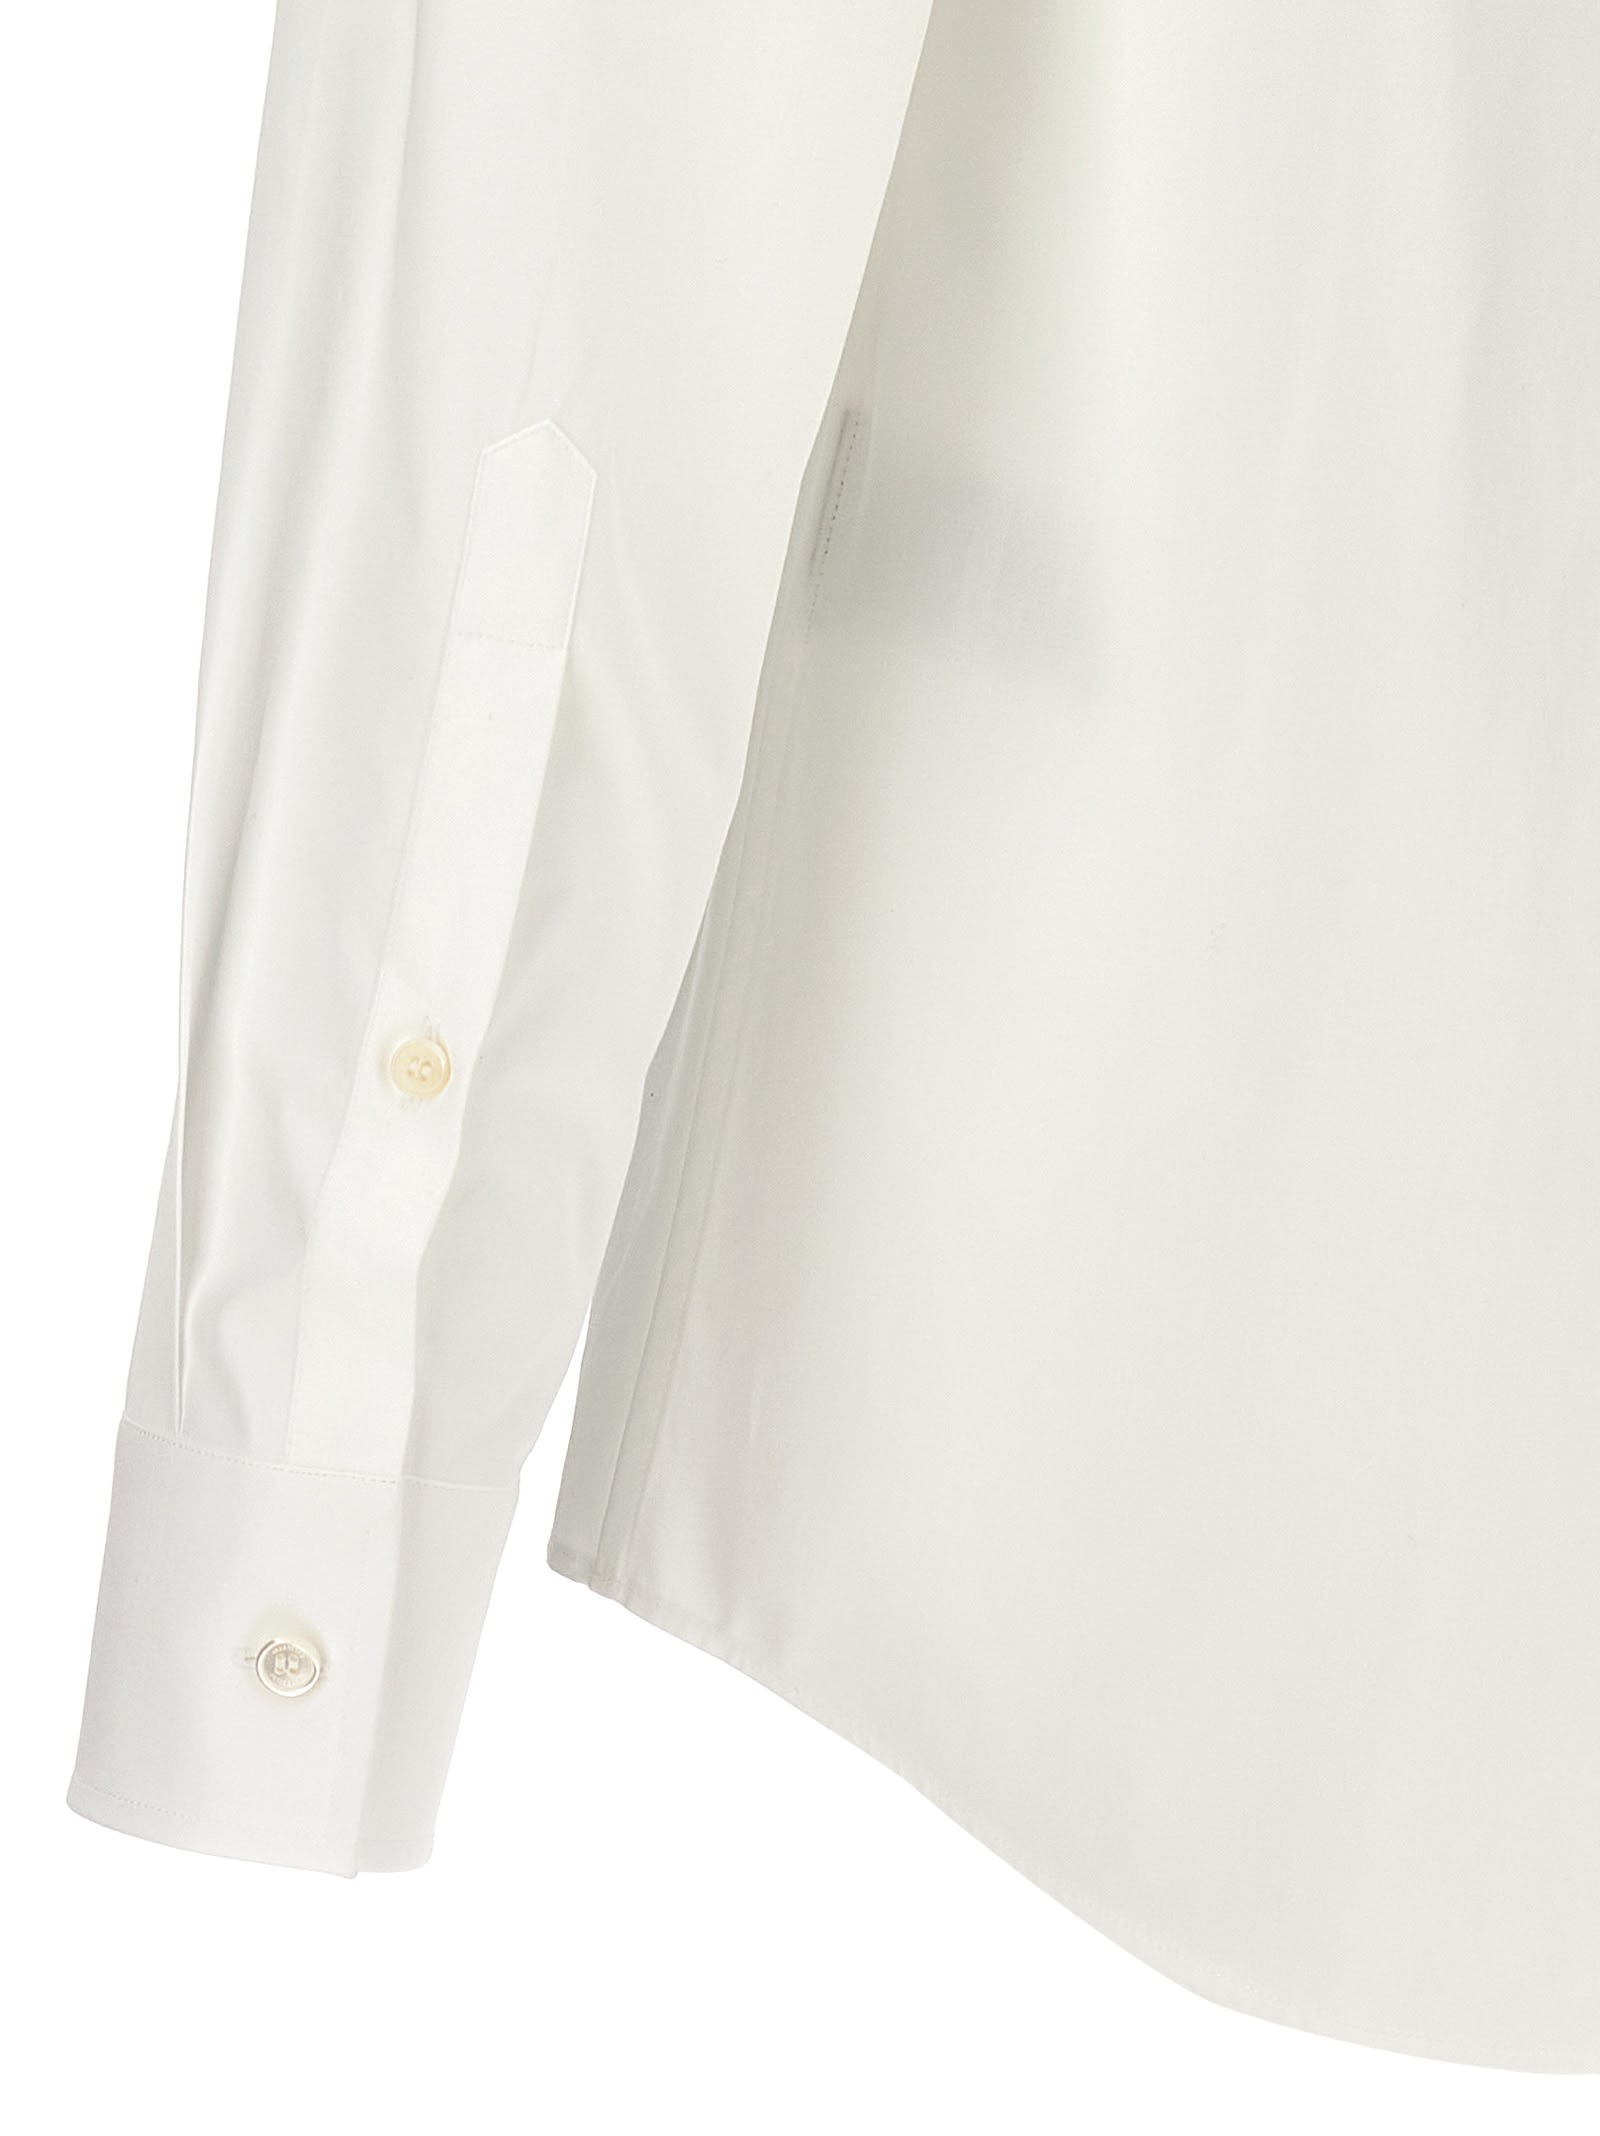 Shop Valentino Shirt With Flower Patch In White